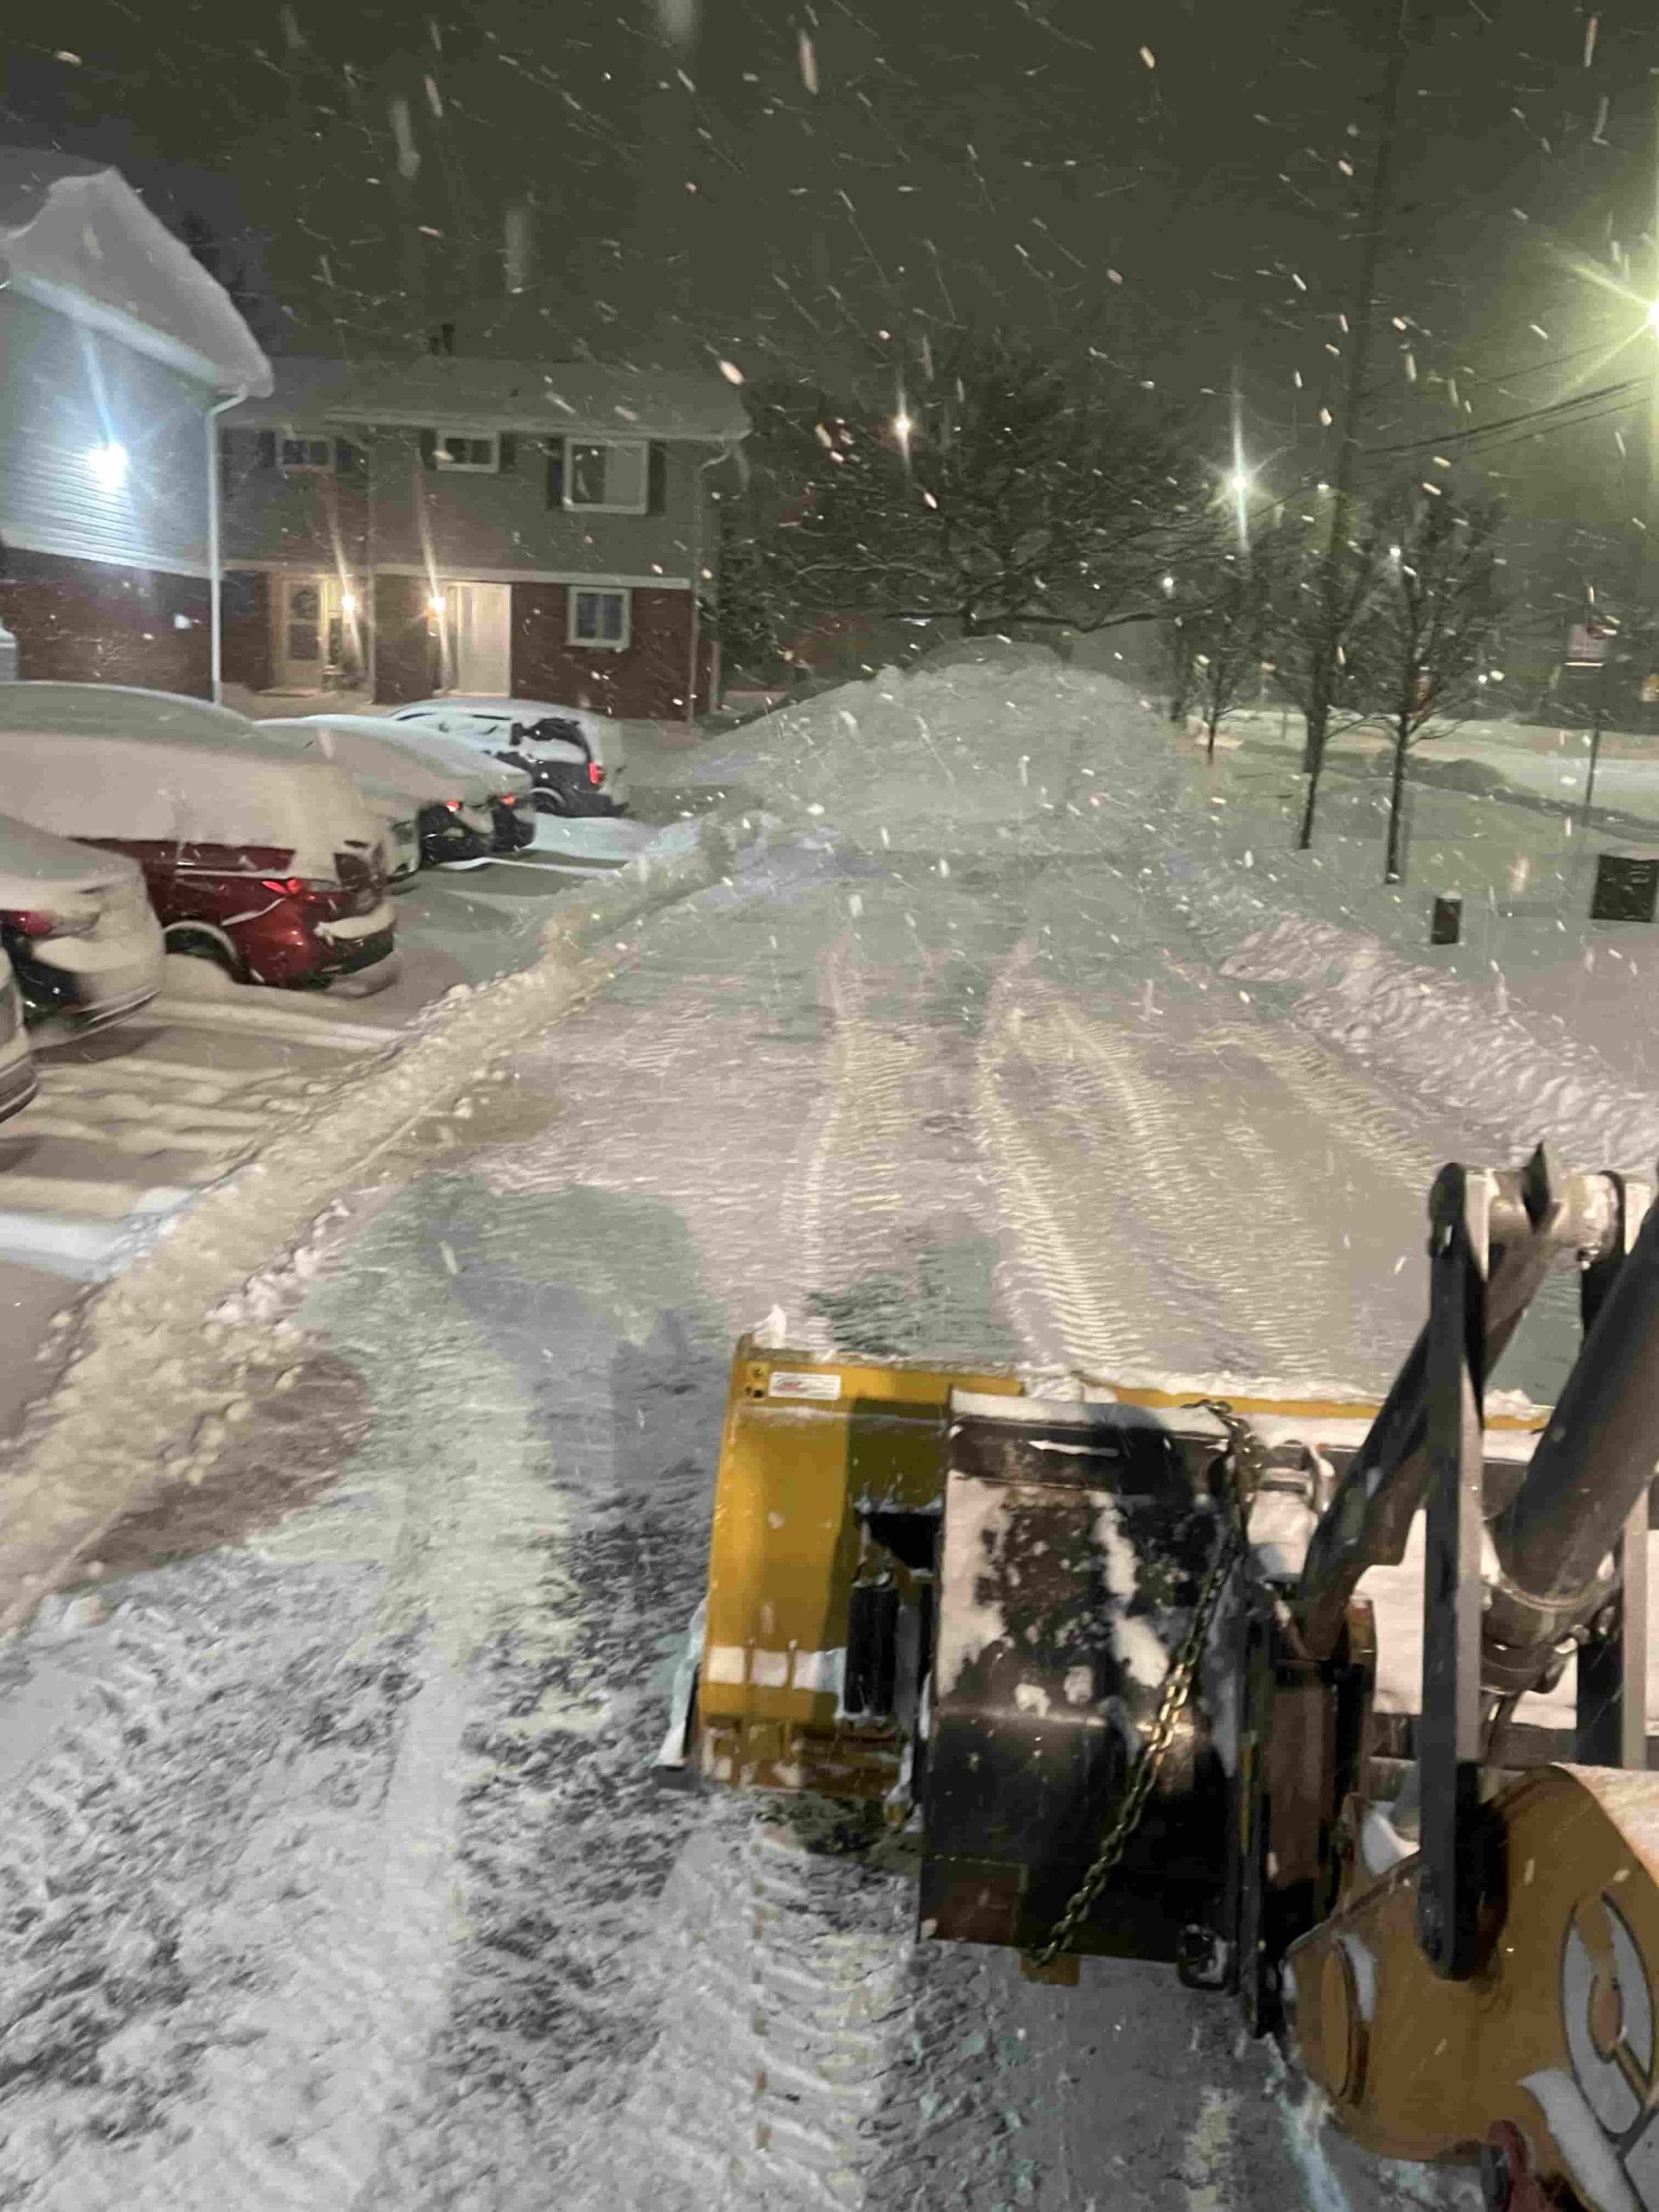 A snowplow works through the night in Ottawa for ensuring clean roads during winter time